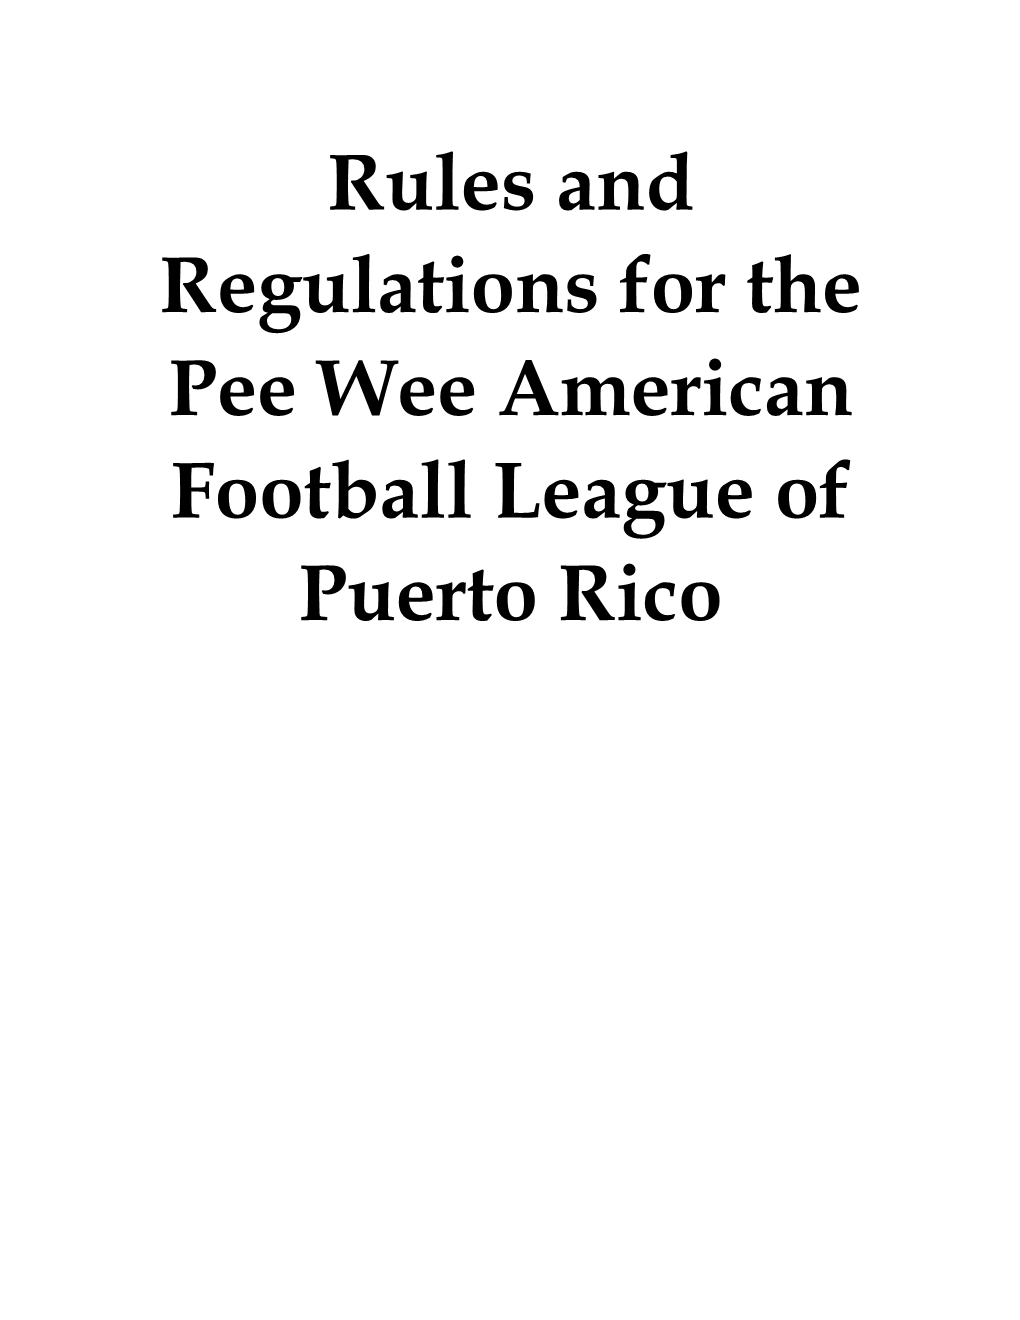 Rules and Regulations for the Pee Wee American Football League of Puerto Rico